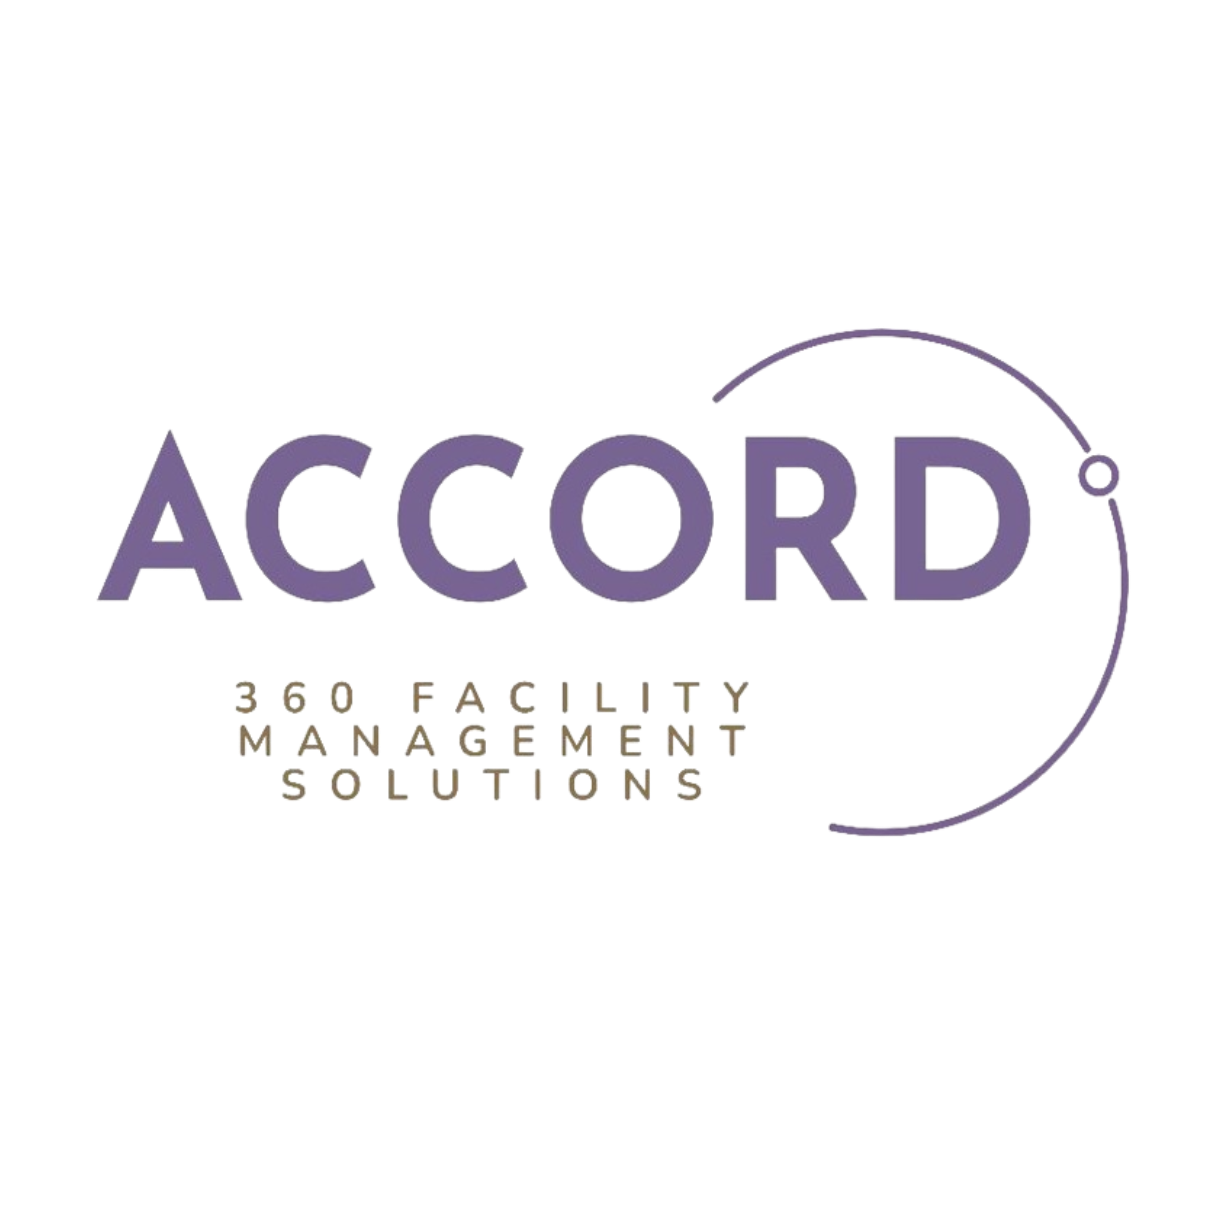 ACCORD FACILITY MANAGEMENT